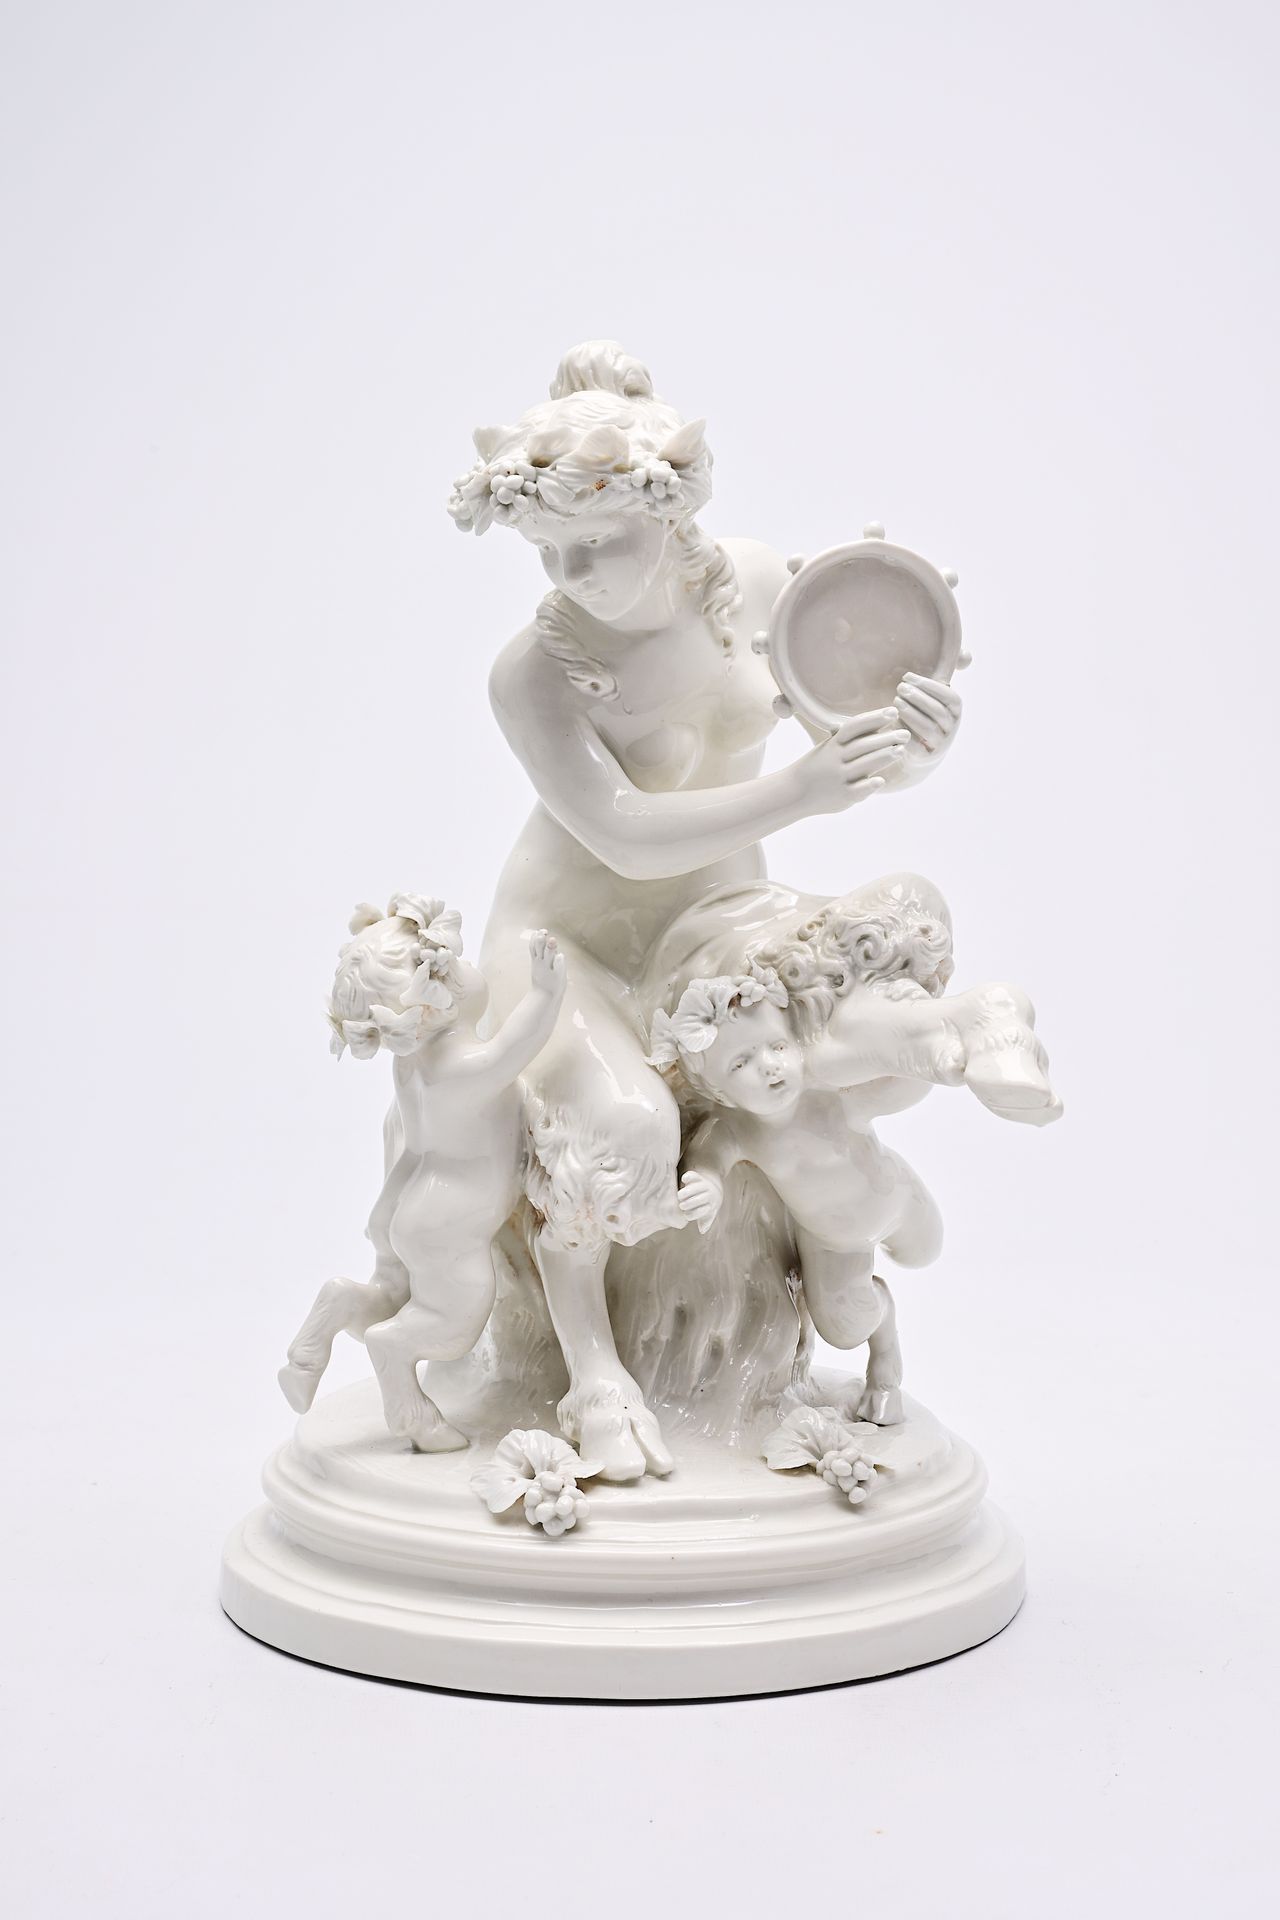 Clodion (1738-1814, after): An Italian playful porcelain group with music-making&hellip;